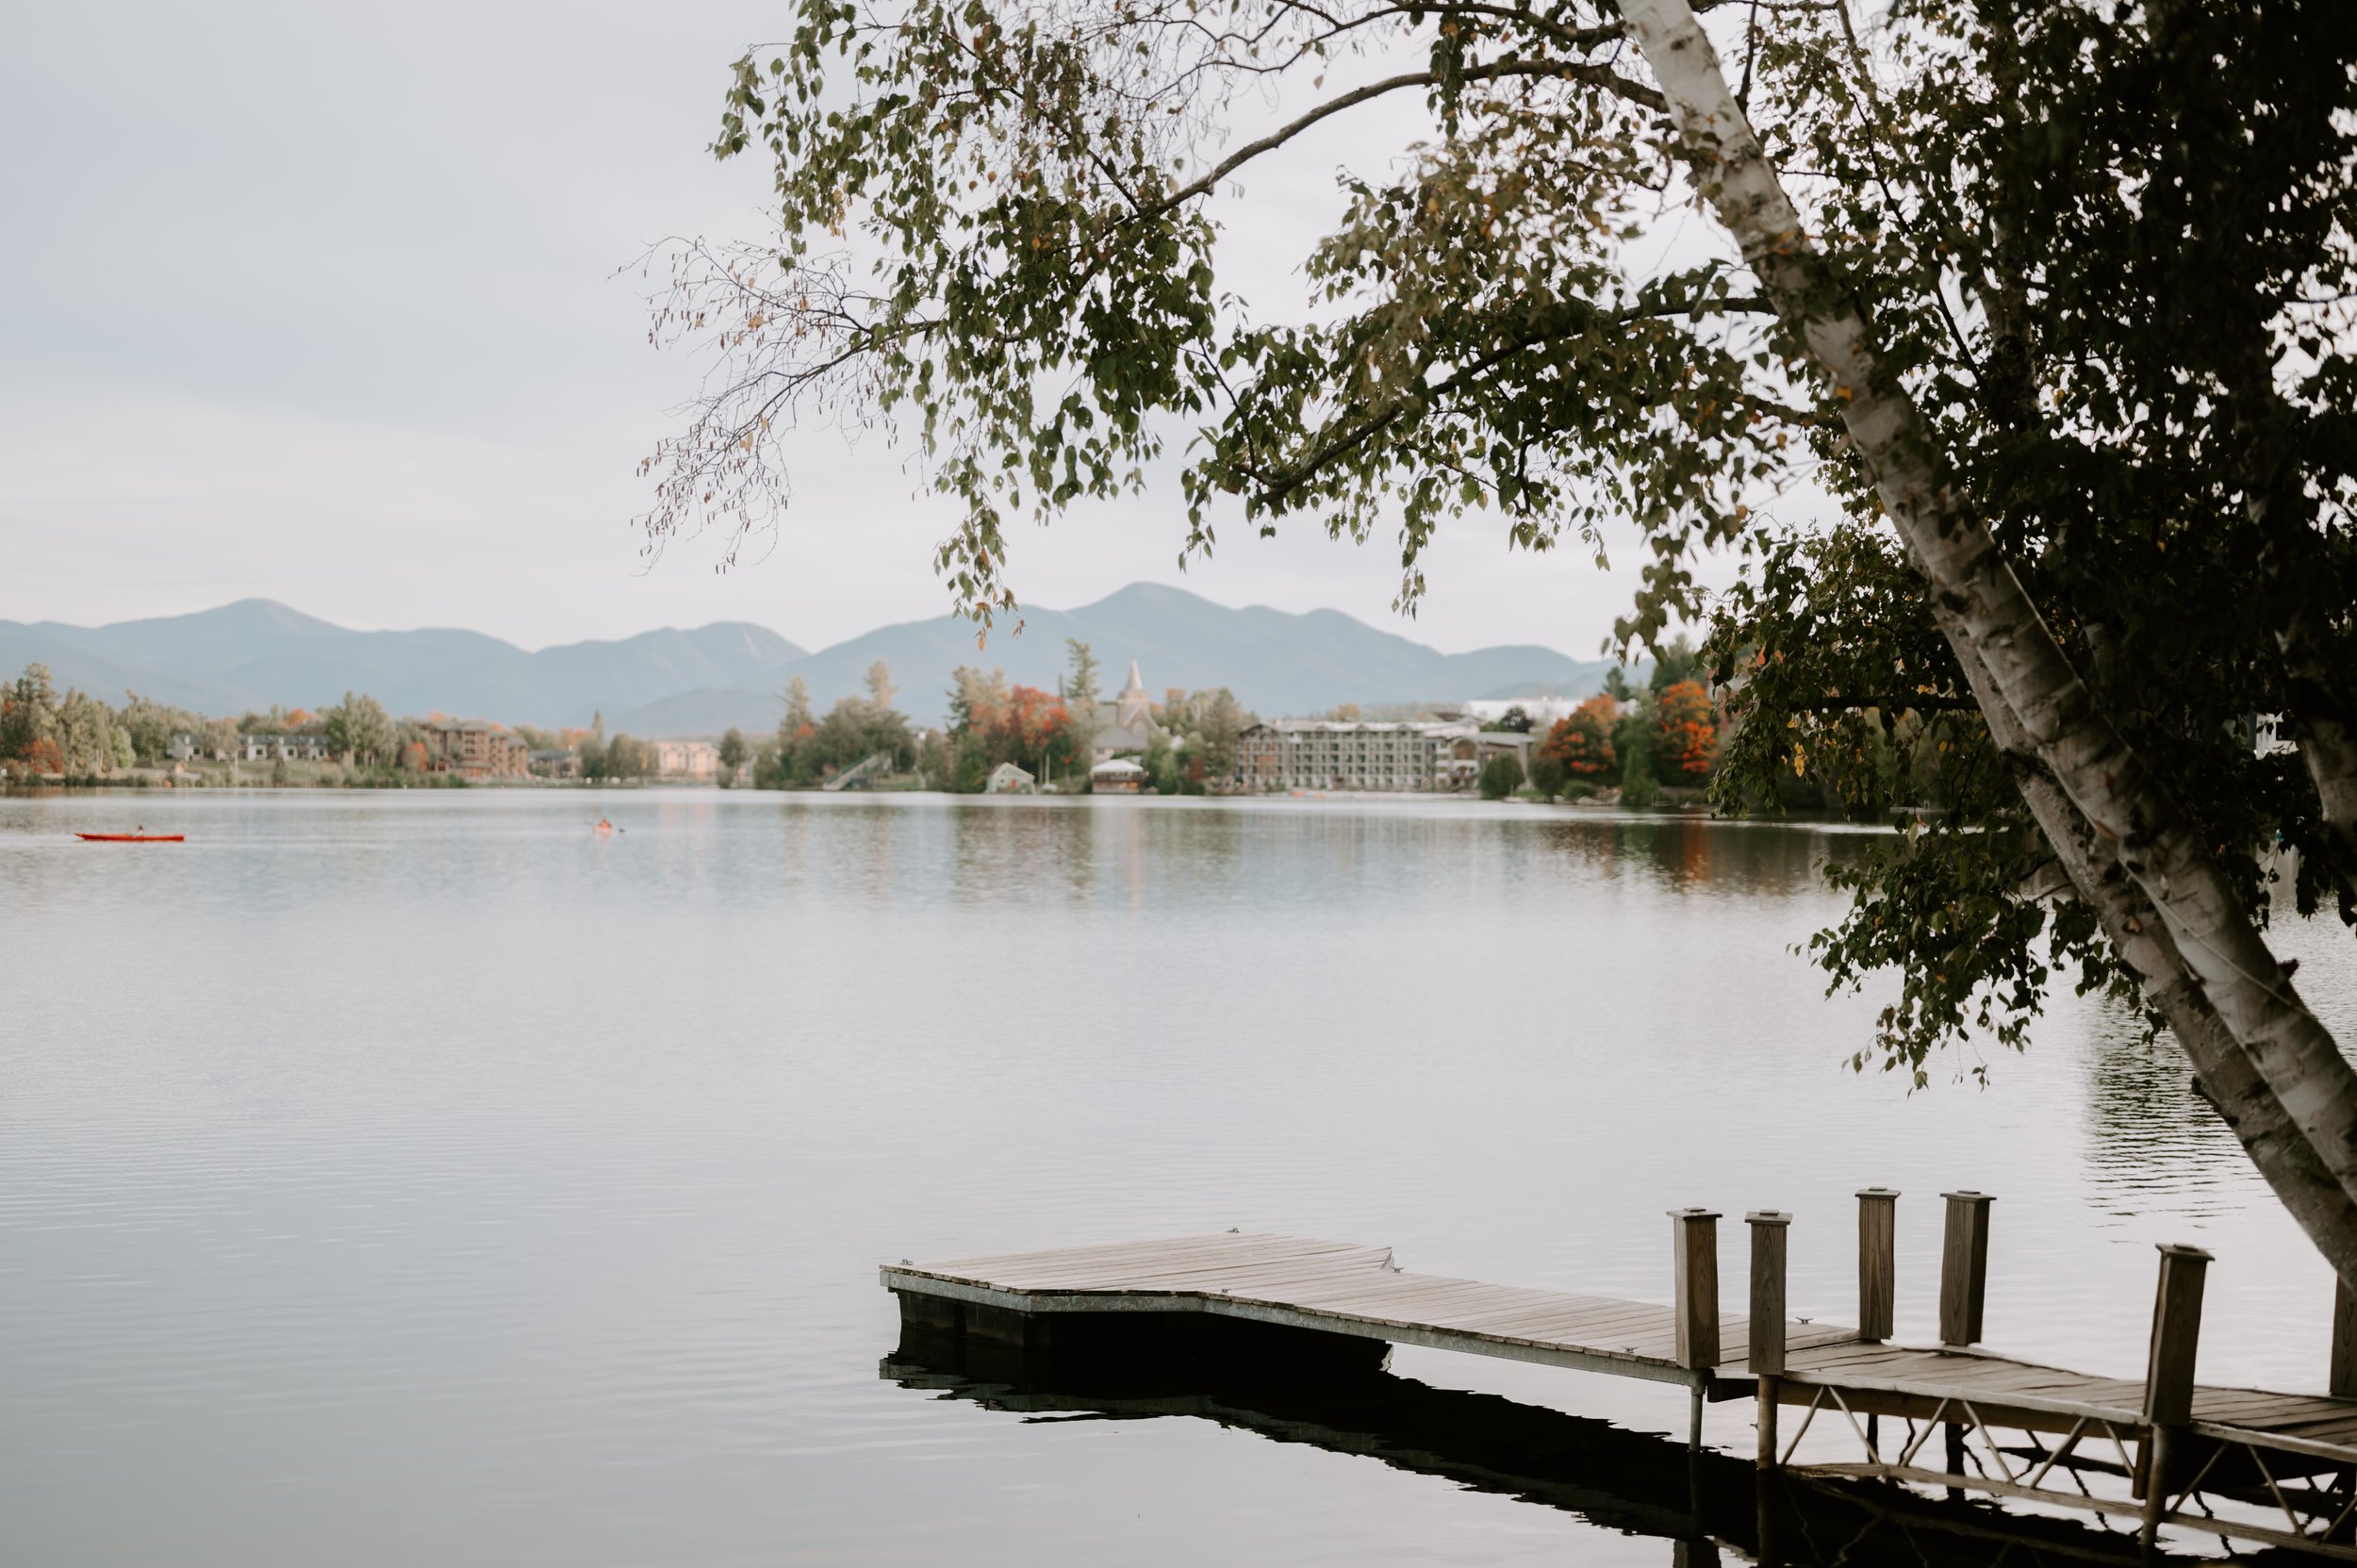 A fall wedding at The Cottage at Mirrow Lake in Lake Placid New York